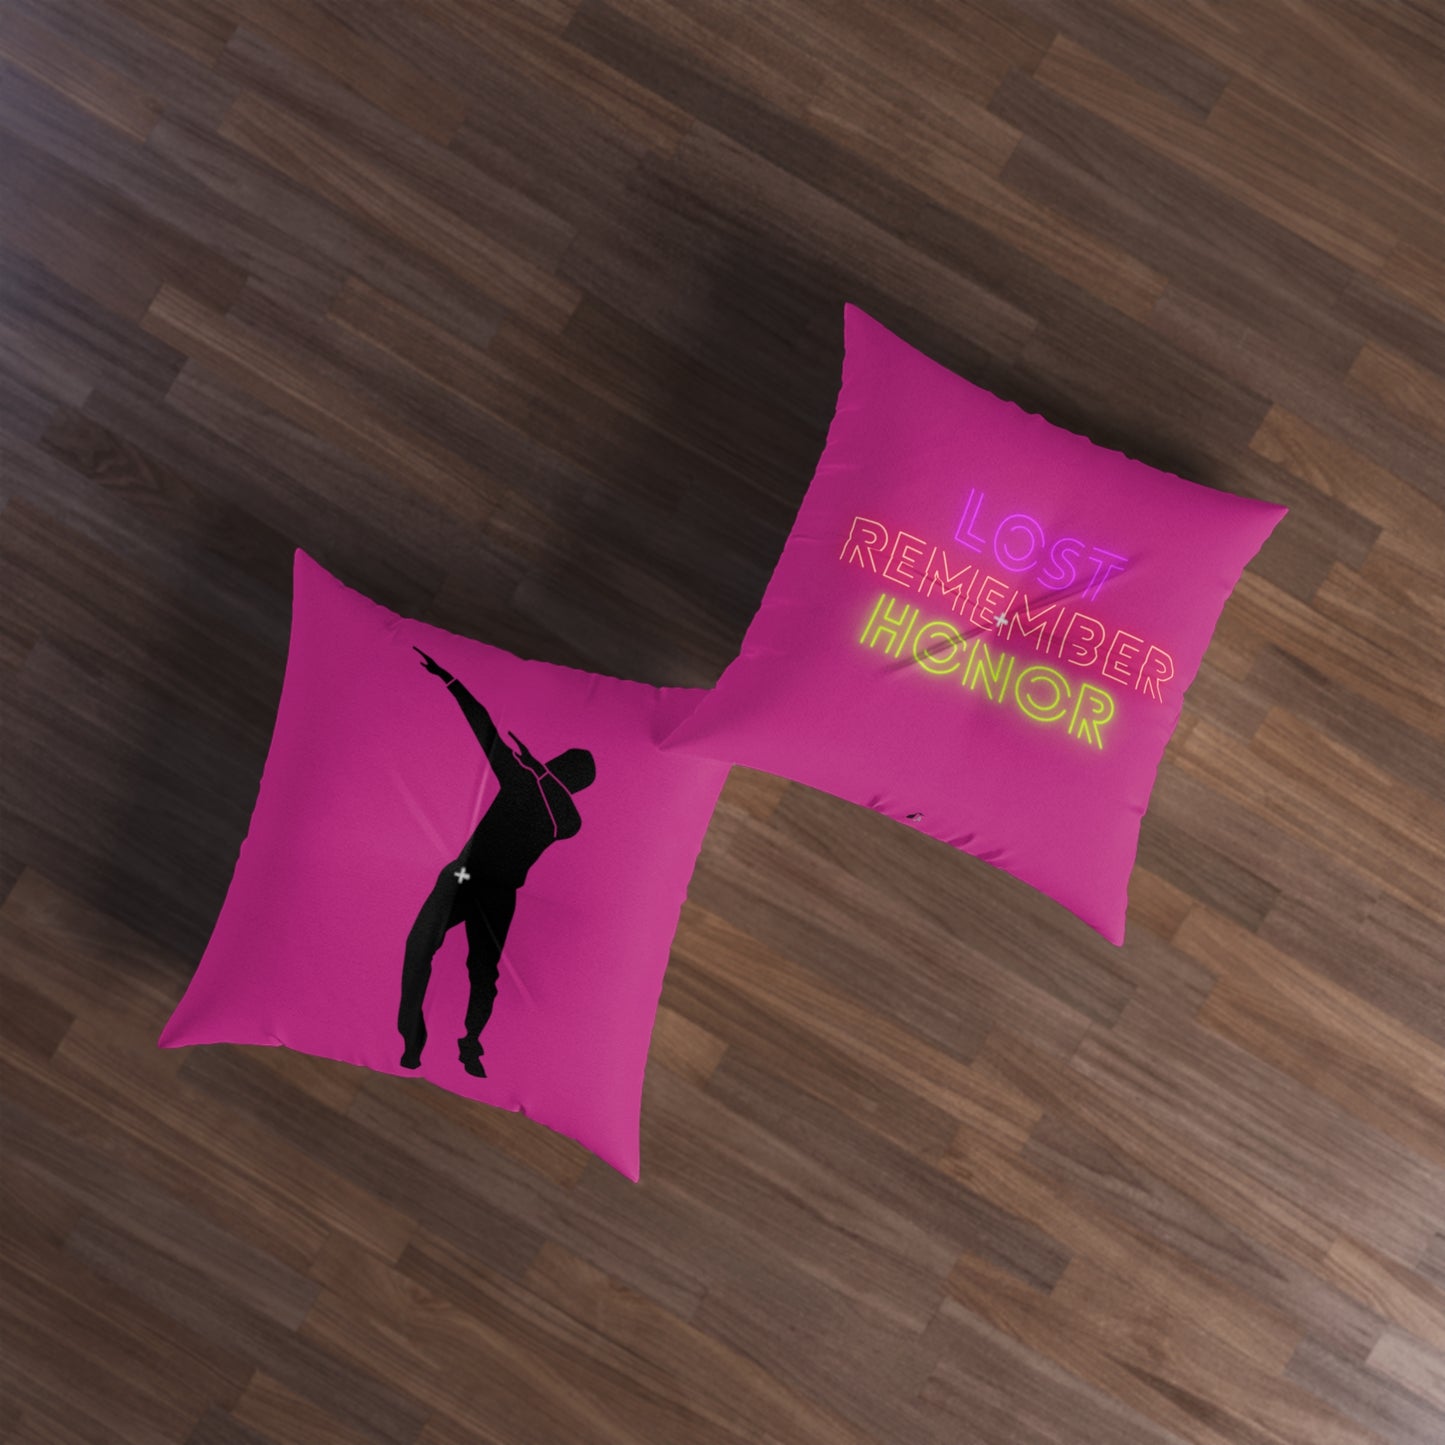 Tufted Floor Pillow, Square: Dance Pink